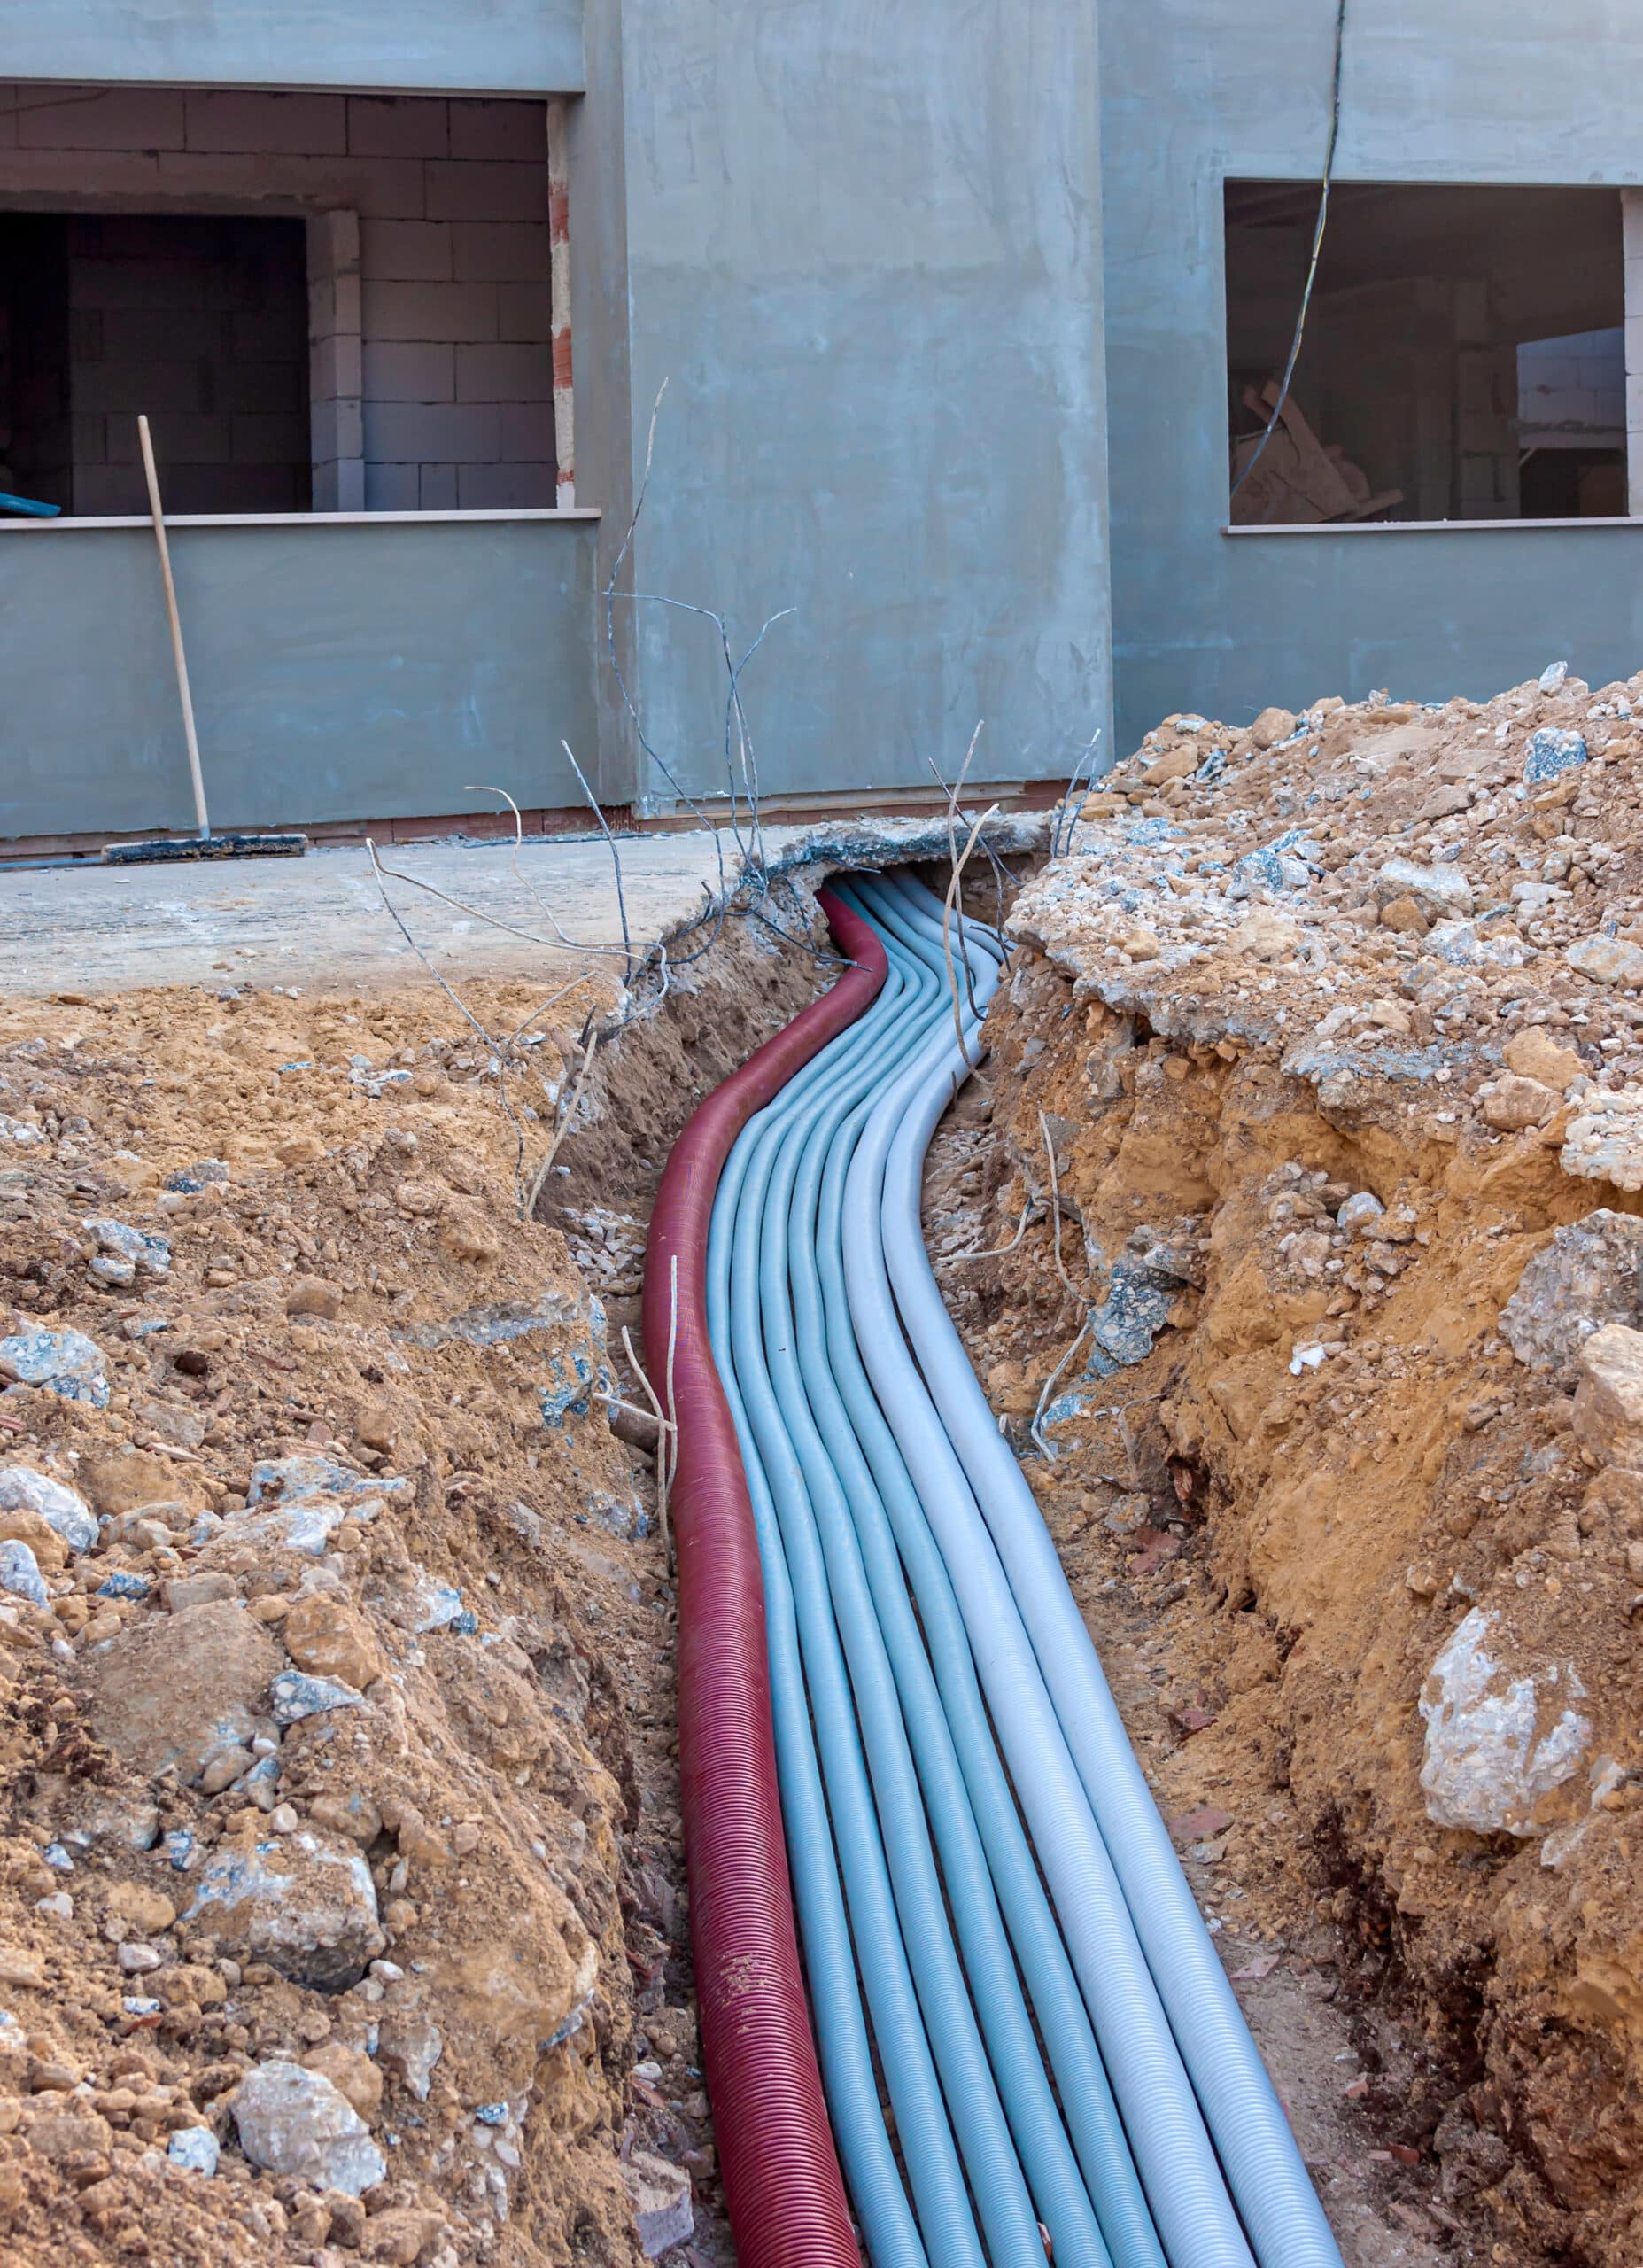 Liquid tight conduit protects wiring in outdoor or underground installations.